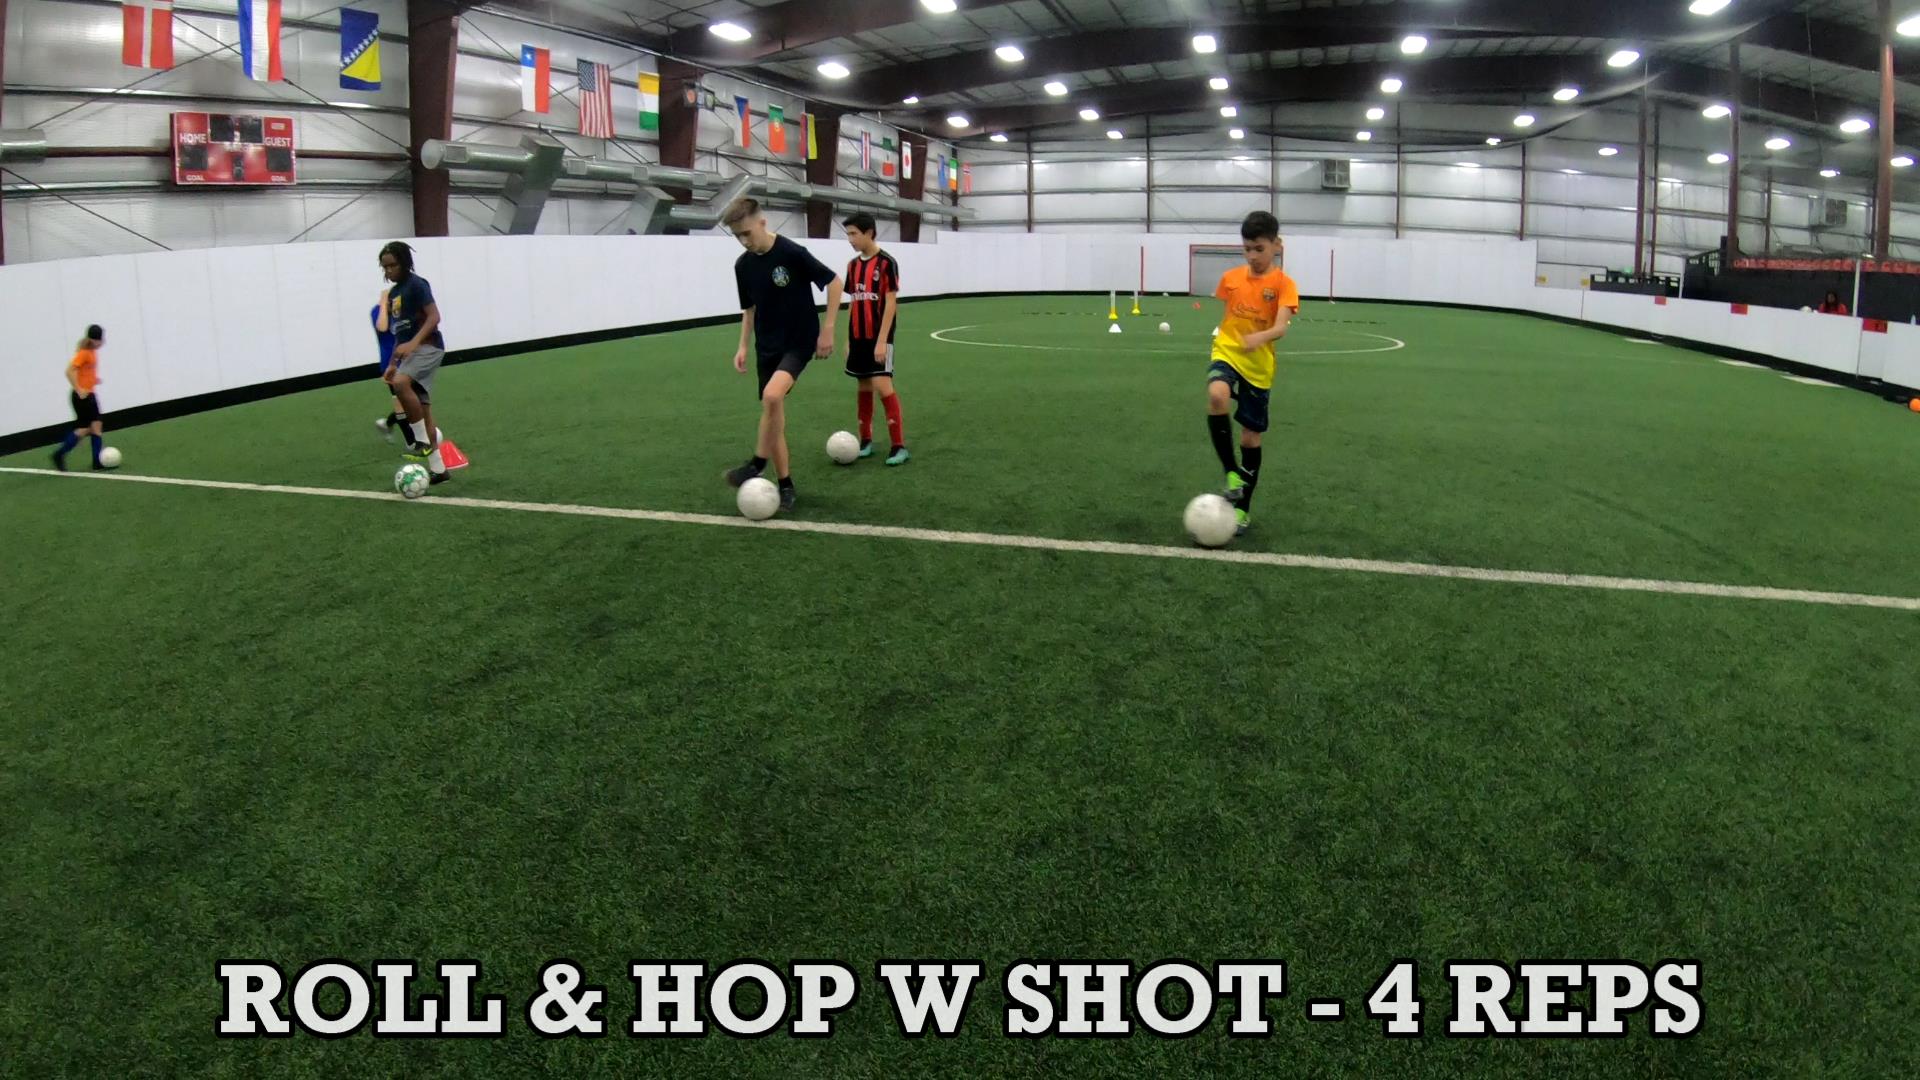 SOCCER COACHING DRILLS FOR KIDS 3